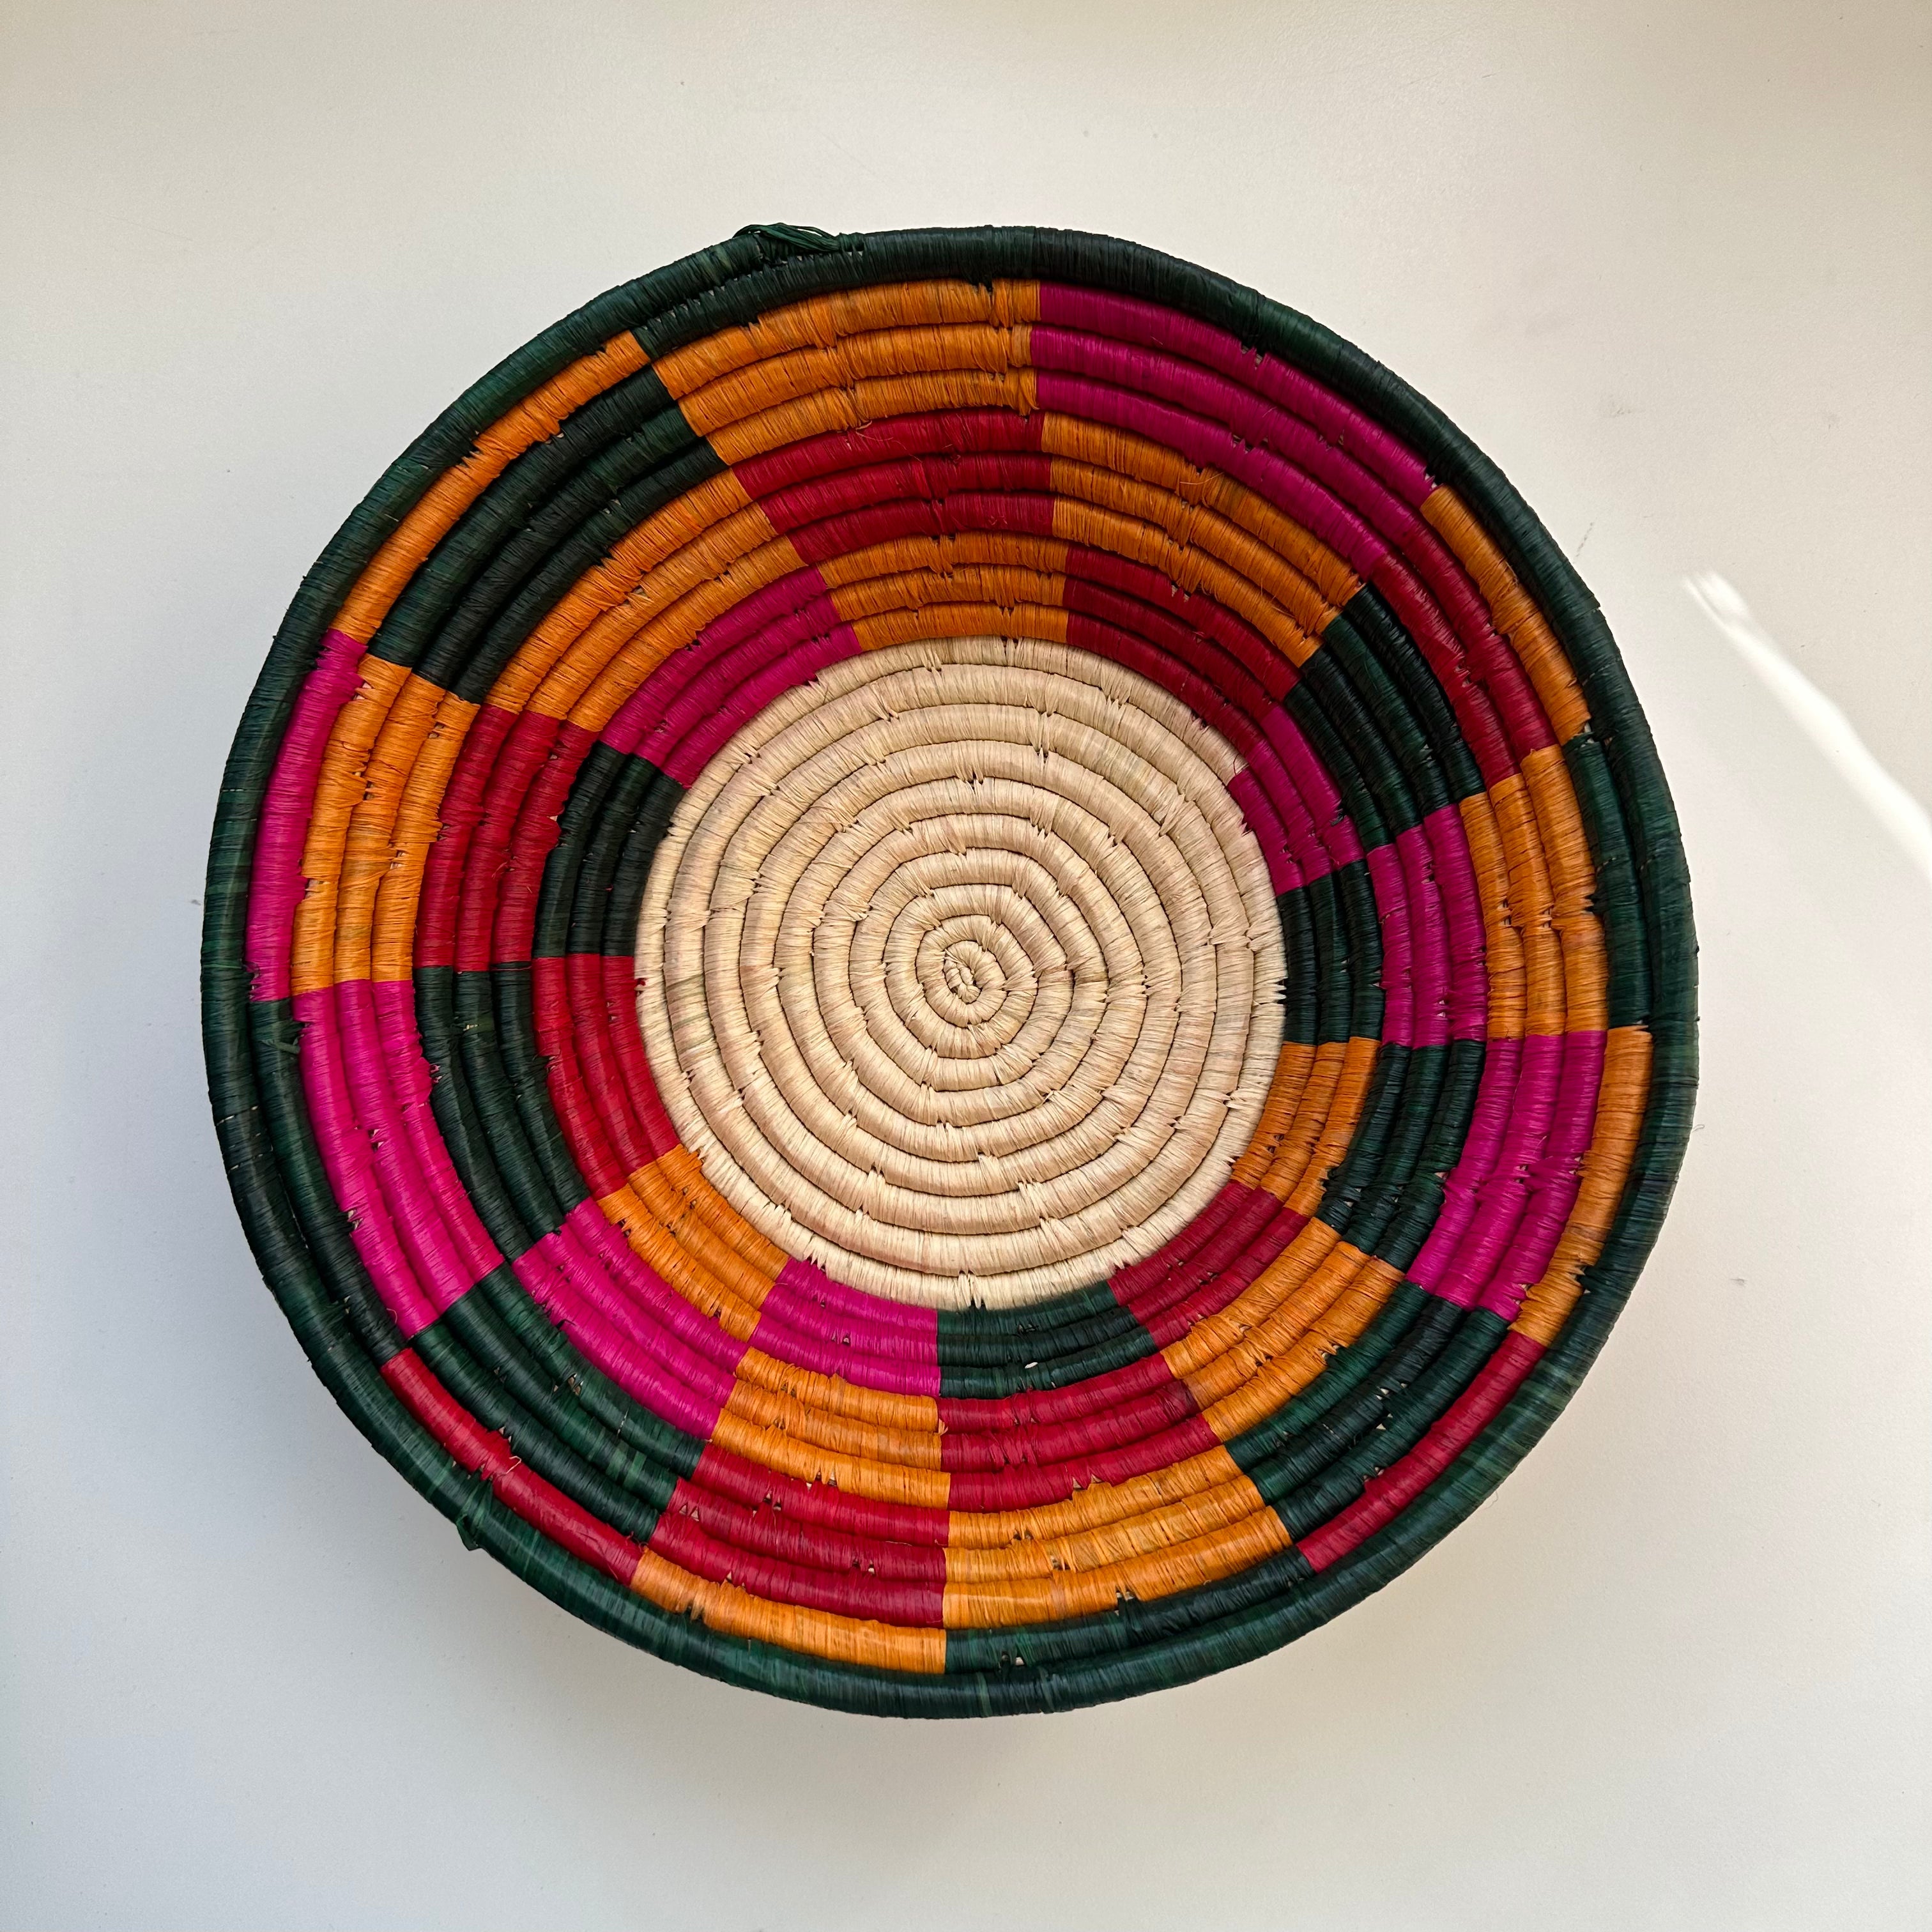 The display of pink, red, green, orange and natural color handwoven bowl